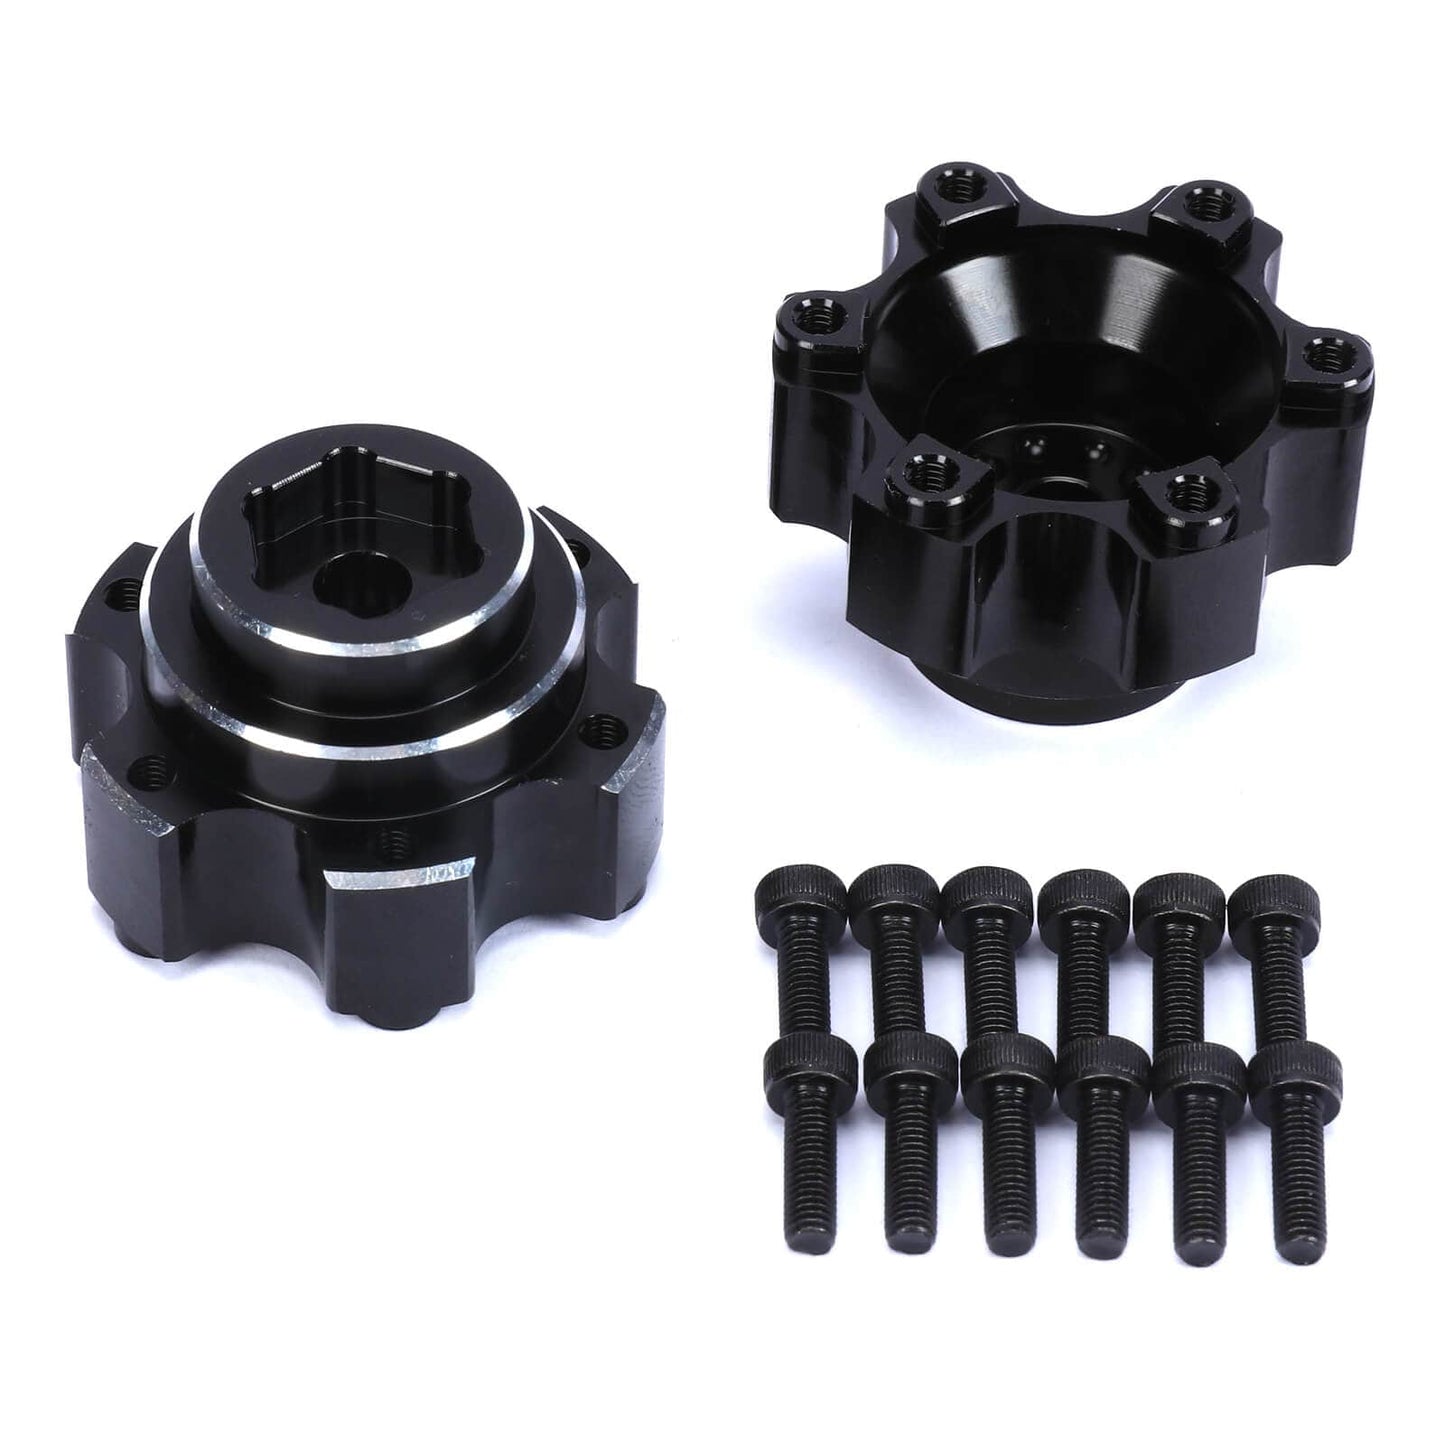 RCAWD UNIHEX UNIHEX 1/10 6x30 to 12mm Aluminum wide Hex Adapters for Pro-line 6x30 Removable Hex Wheels Black